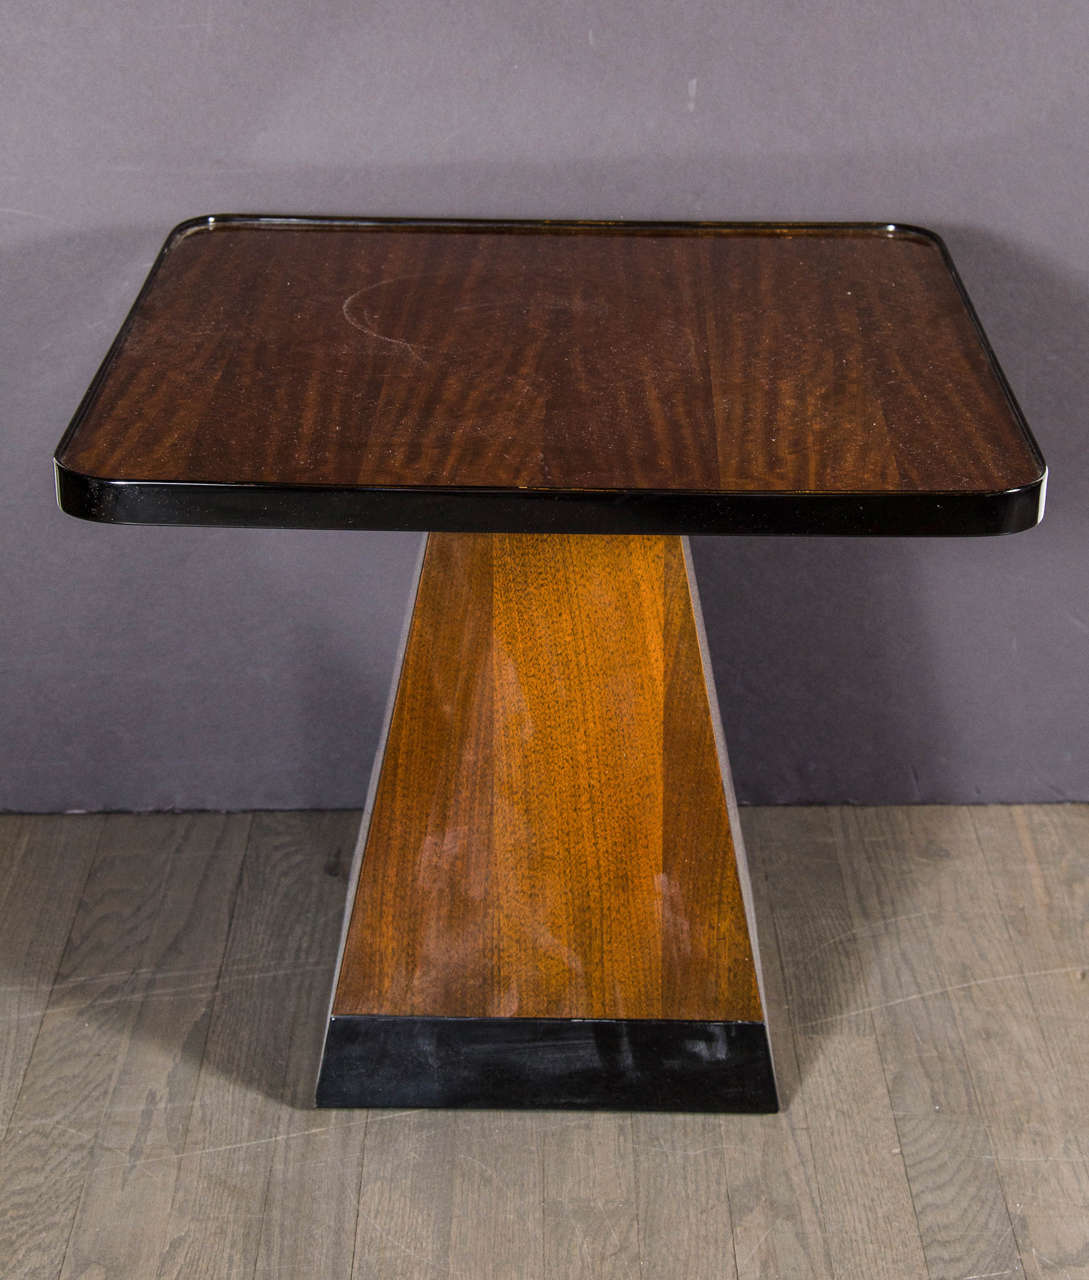 This superb Art Deco occasional table features strong geometric design banded in black lacquer around the edge of the square table top and the base which contrasts nicely with the warm tones of the book matched exotic mahogany. Restored to mint